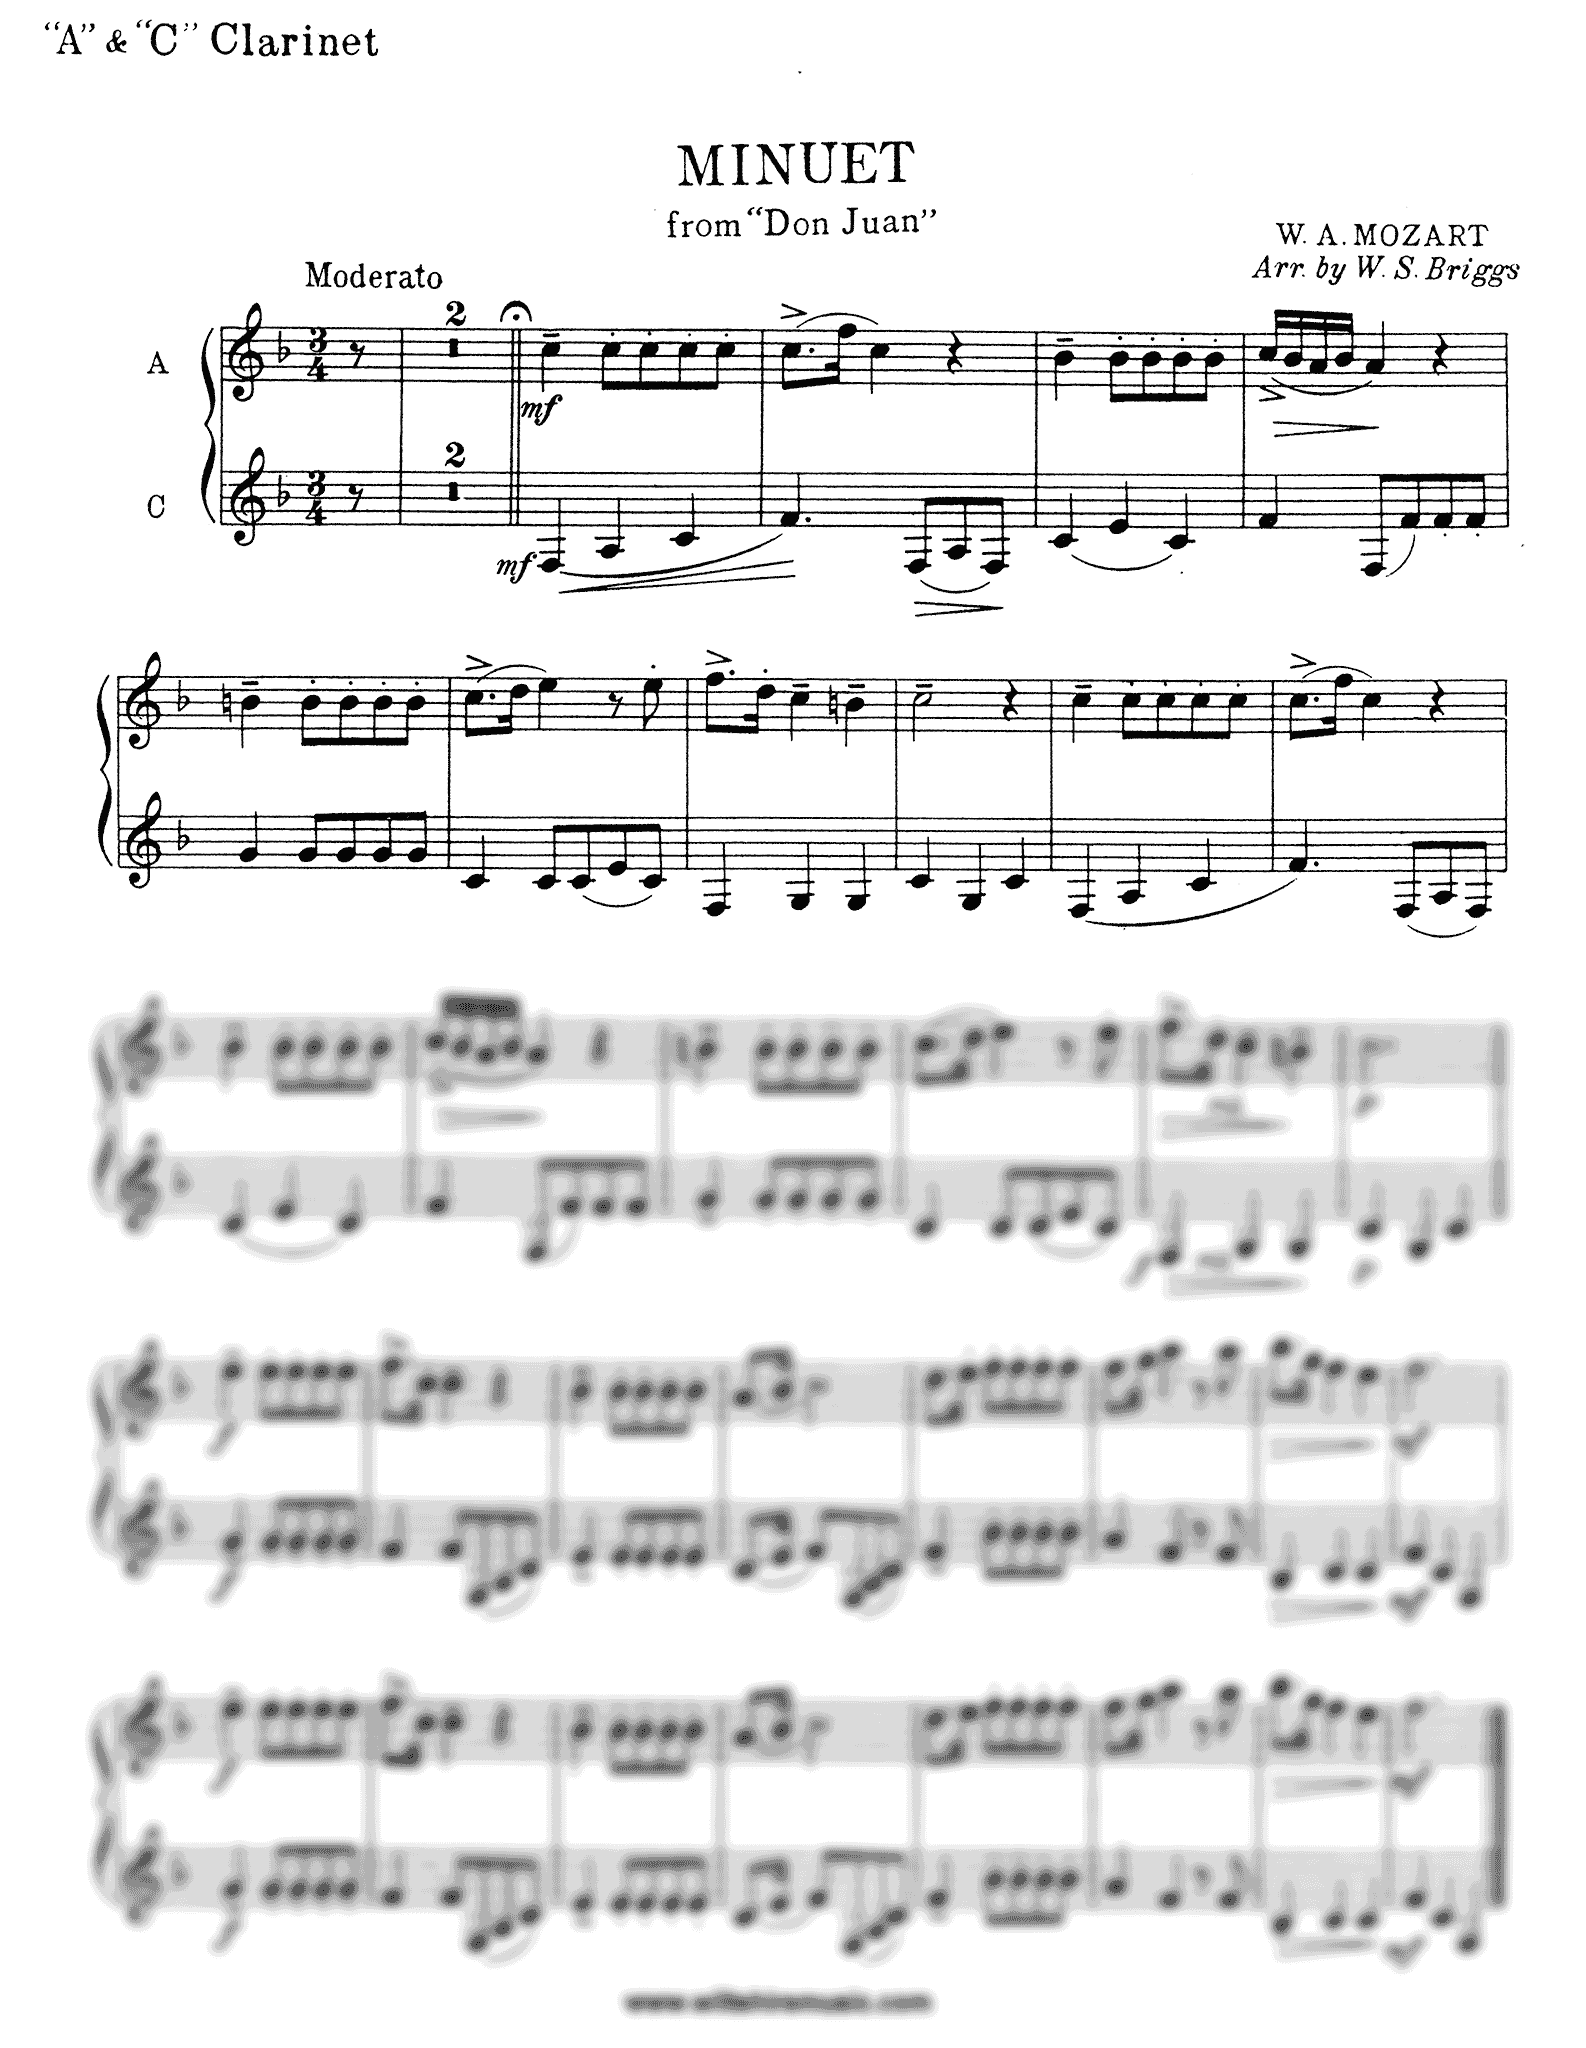 Mozart Minuet, from ‘Don Giovanni’ Act I Scene 20 Finale three clarinets and piano arrangement parts A and C